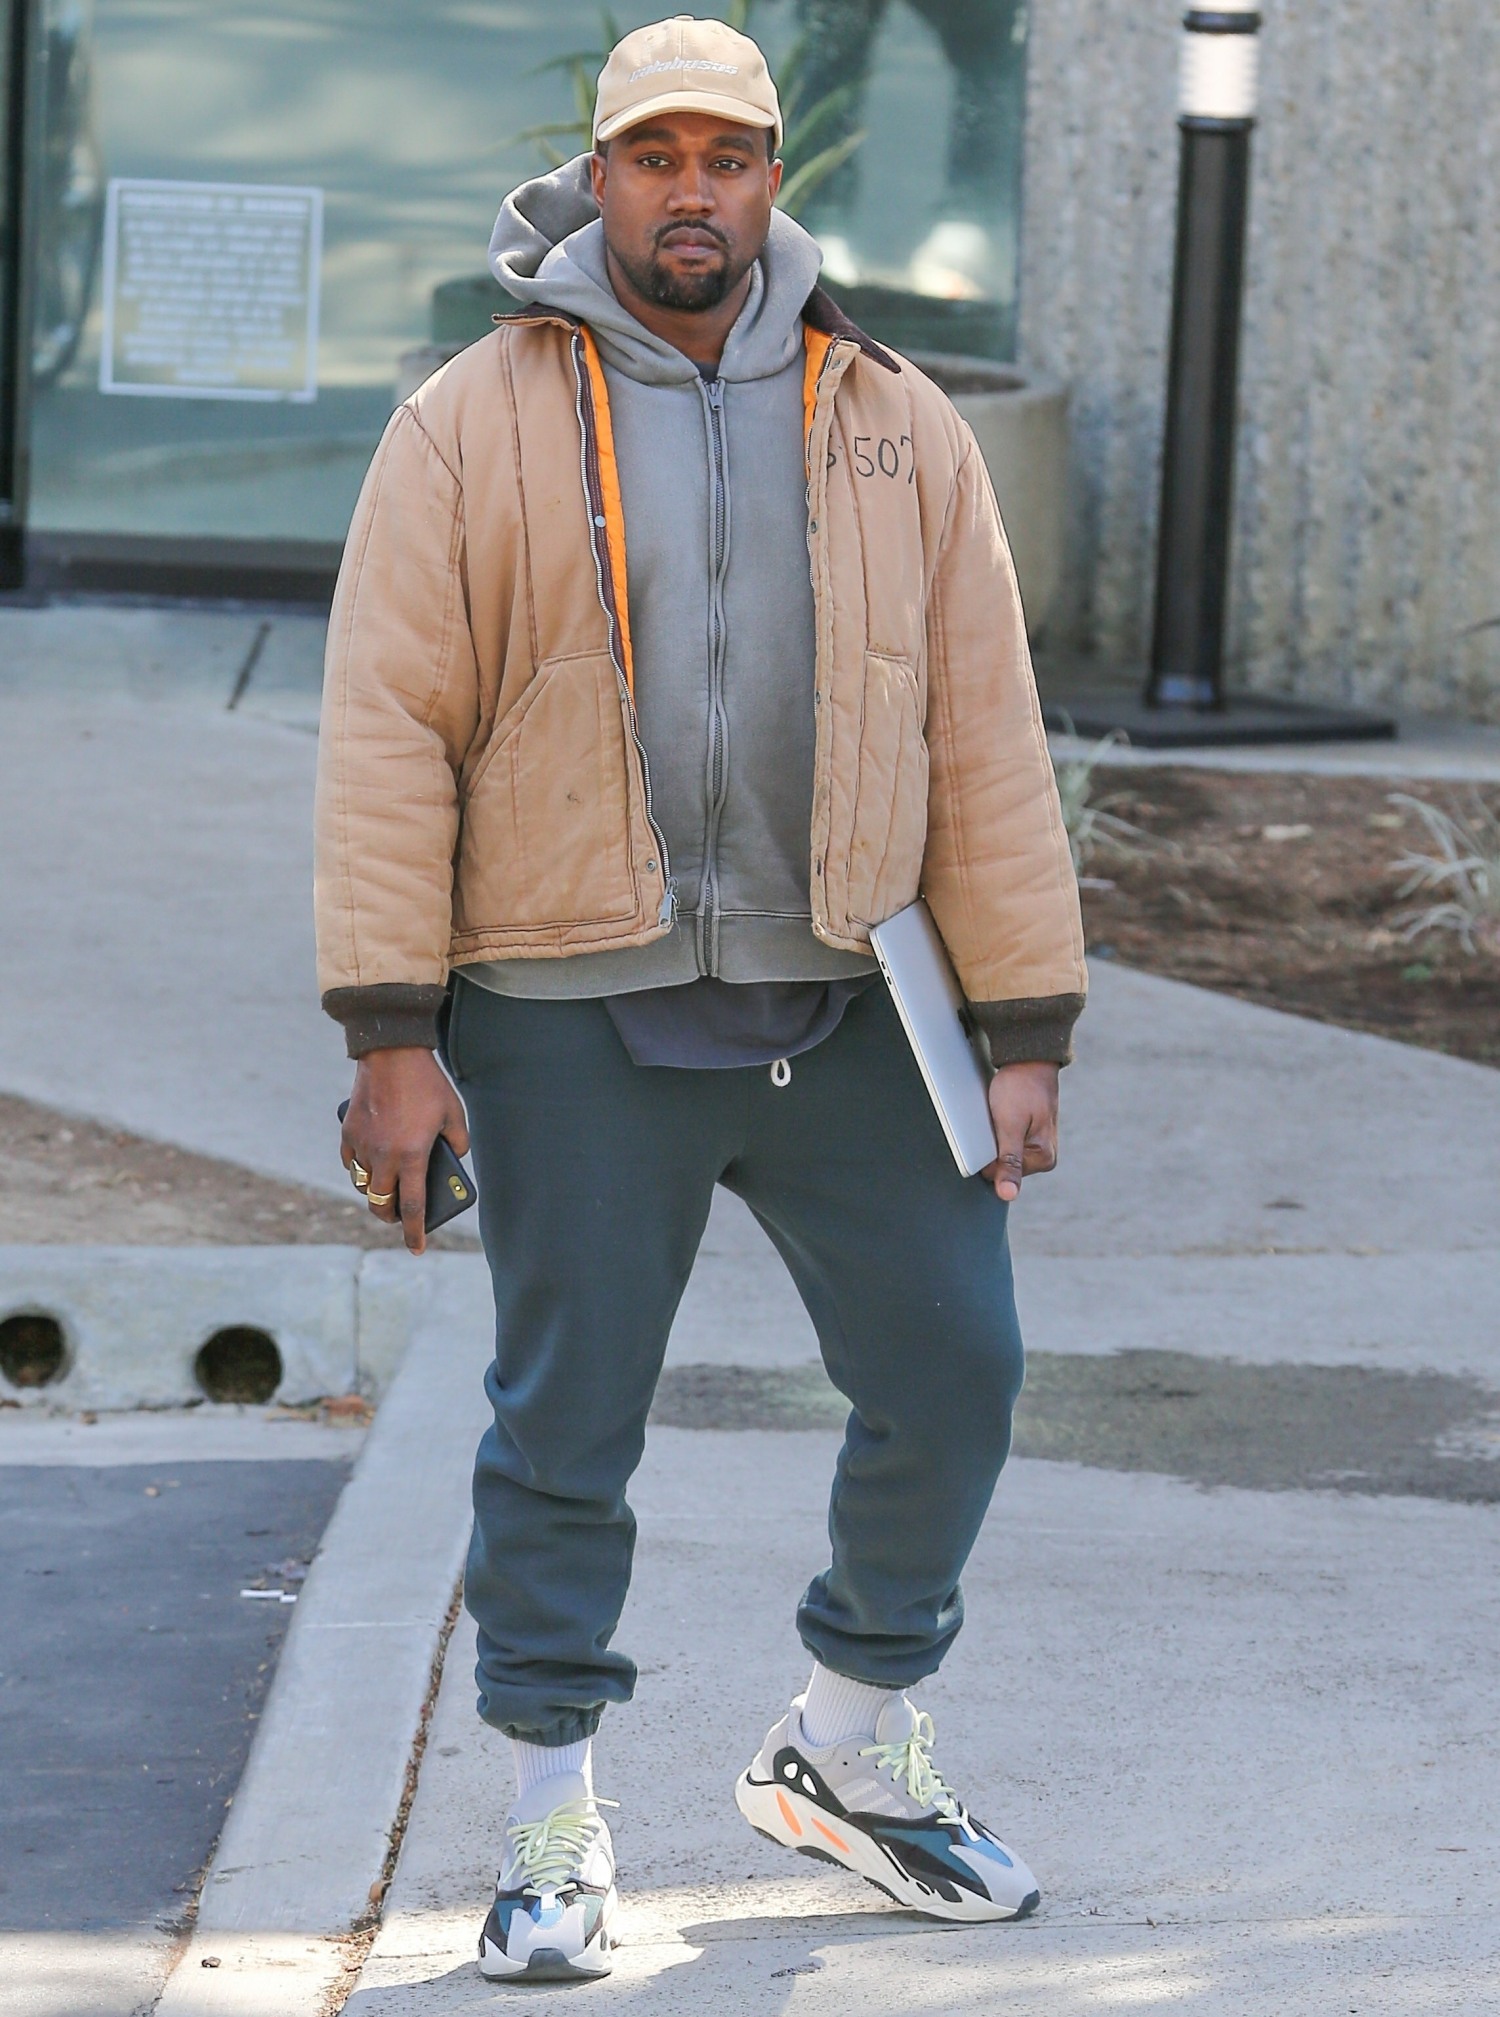 Kanye West greets our shutterbugs with open arms!